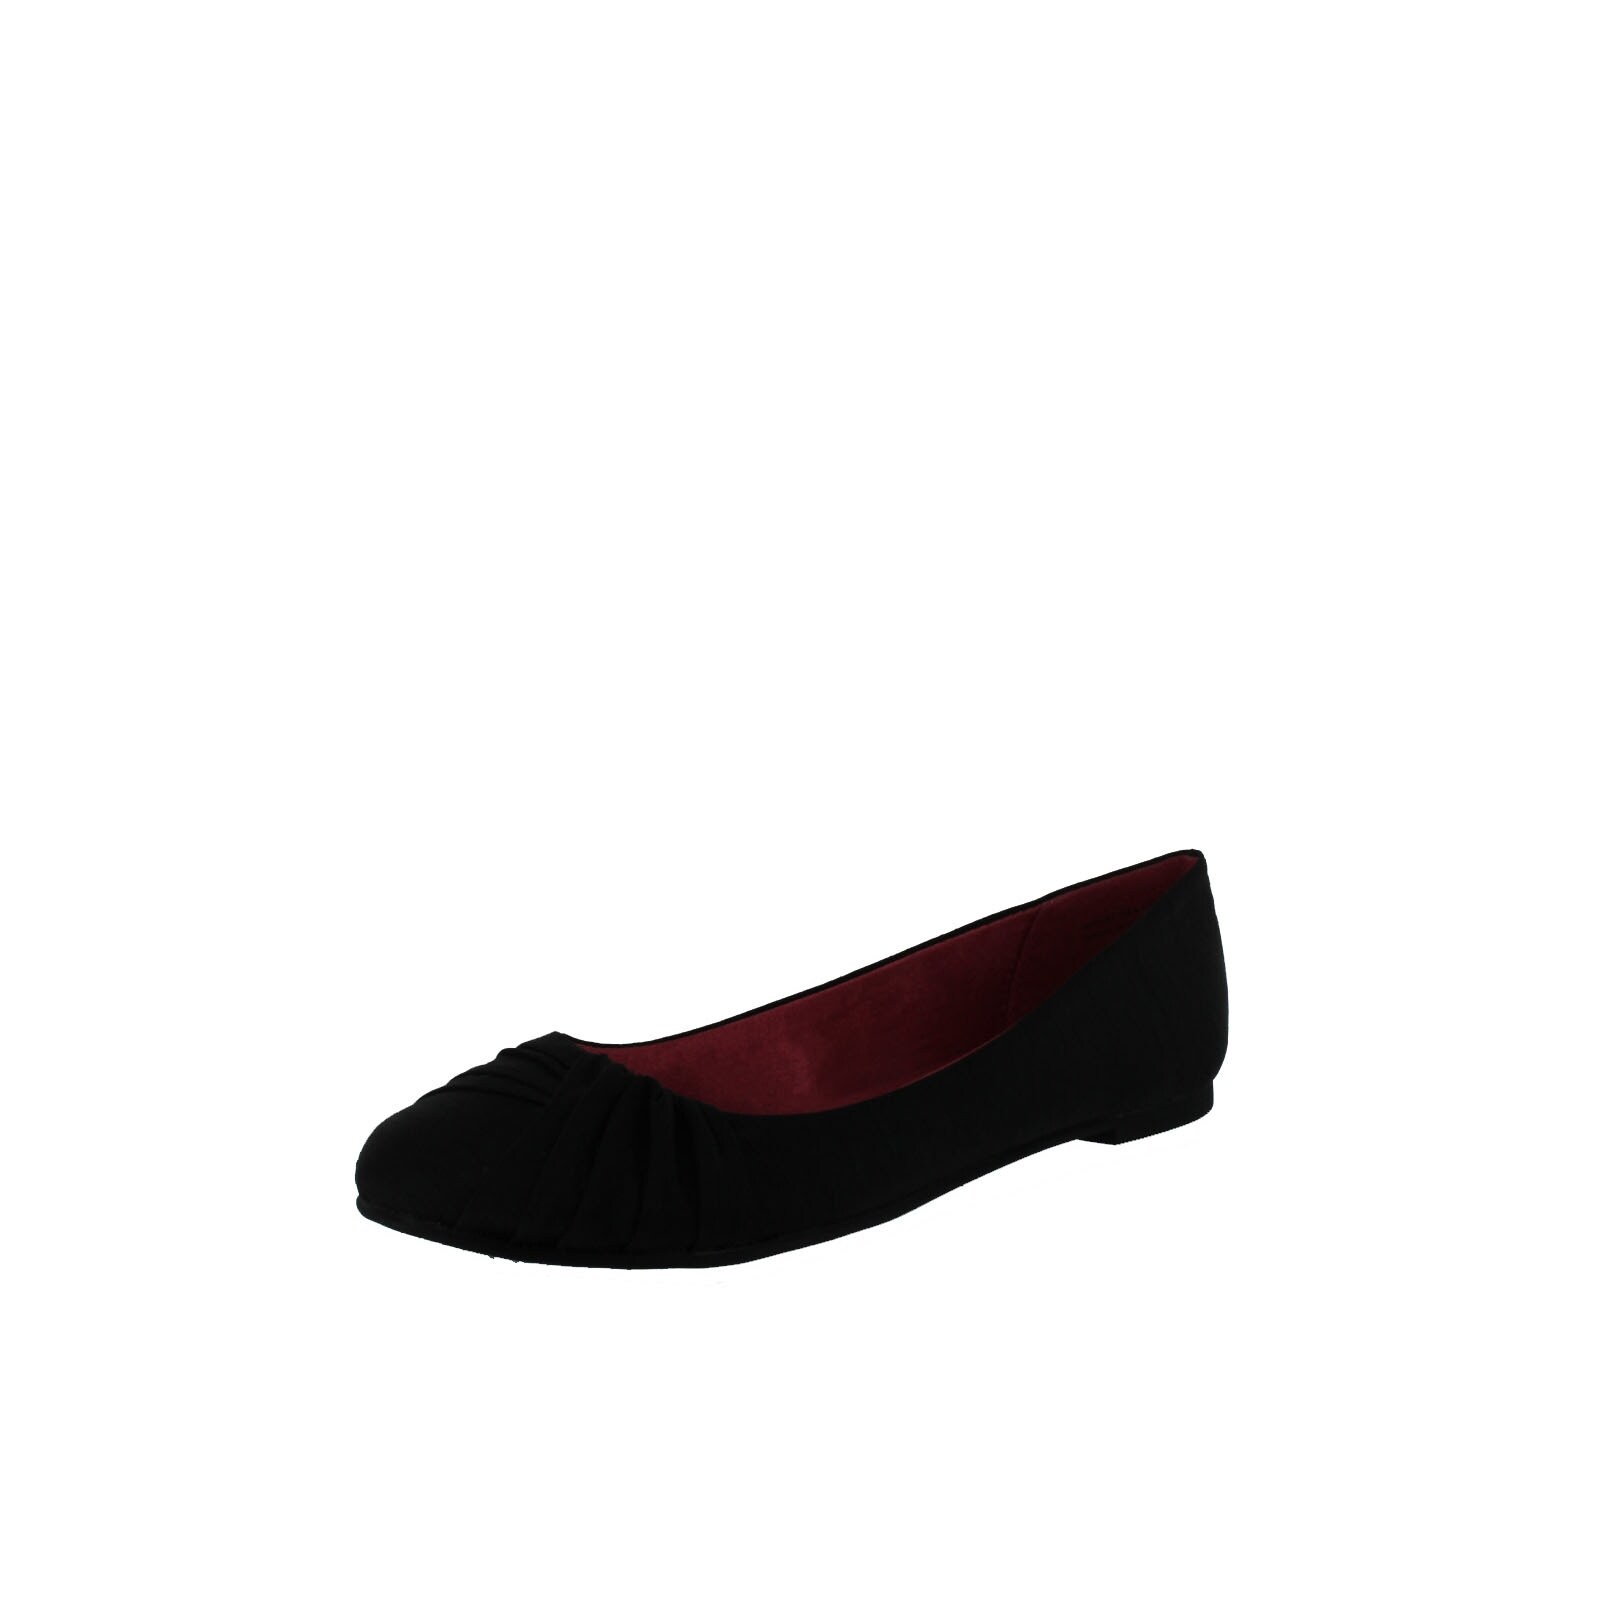 chinese black flat shoes